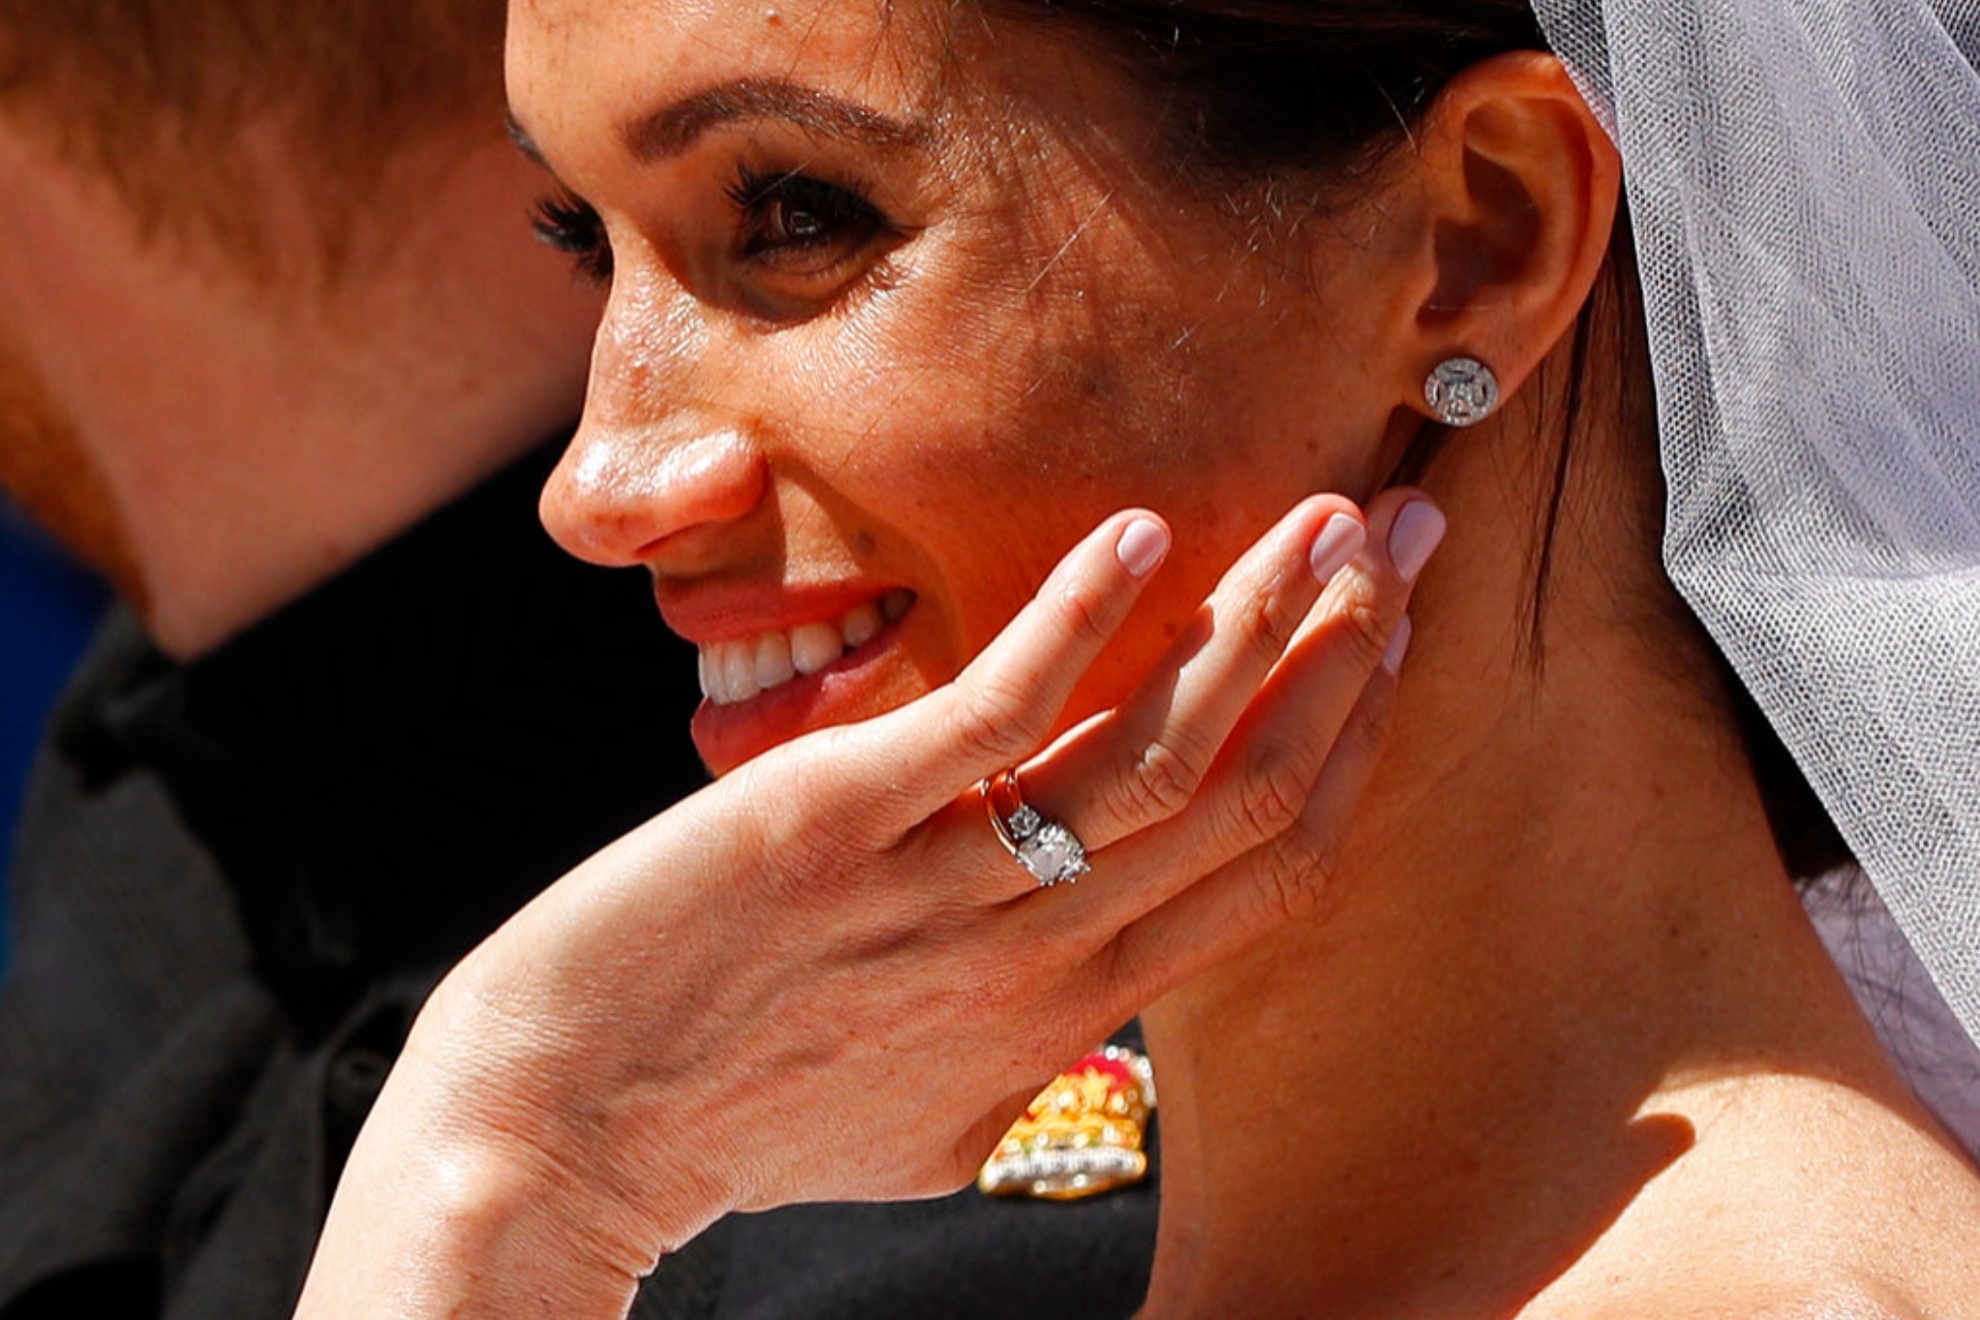 Meghan Markle has never confirmed the alleged changes to her ring.